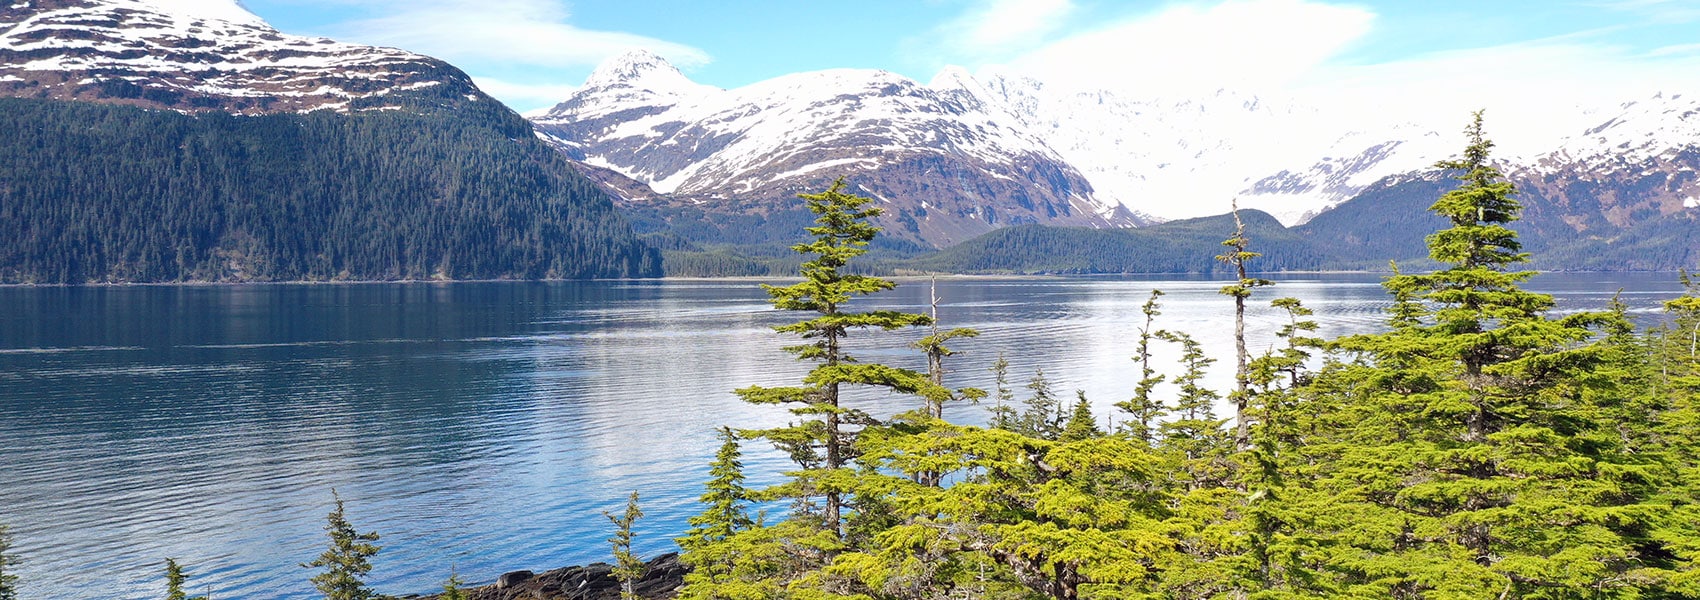 View of Prince William Sound with hemlock trees in the foreground.